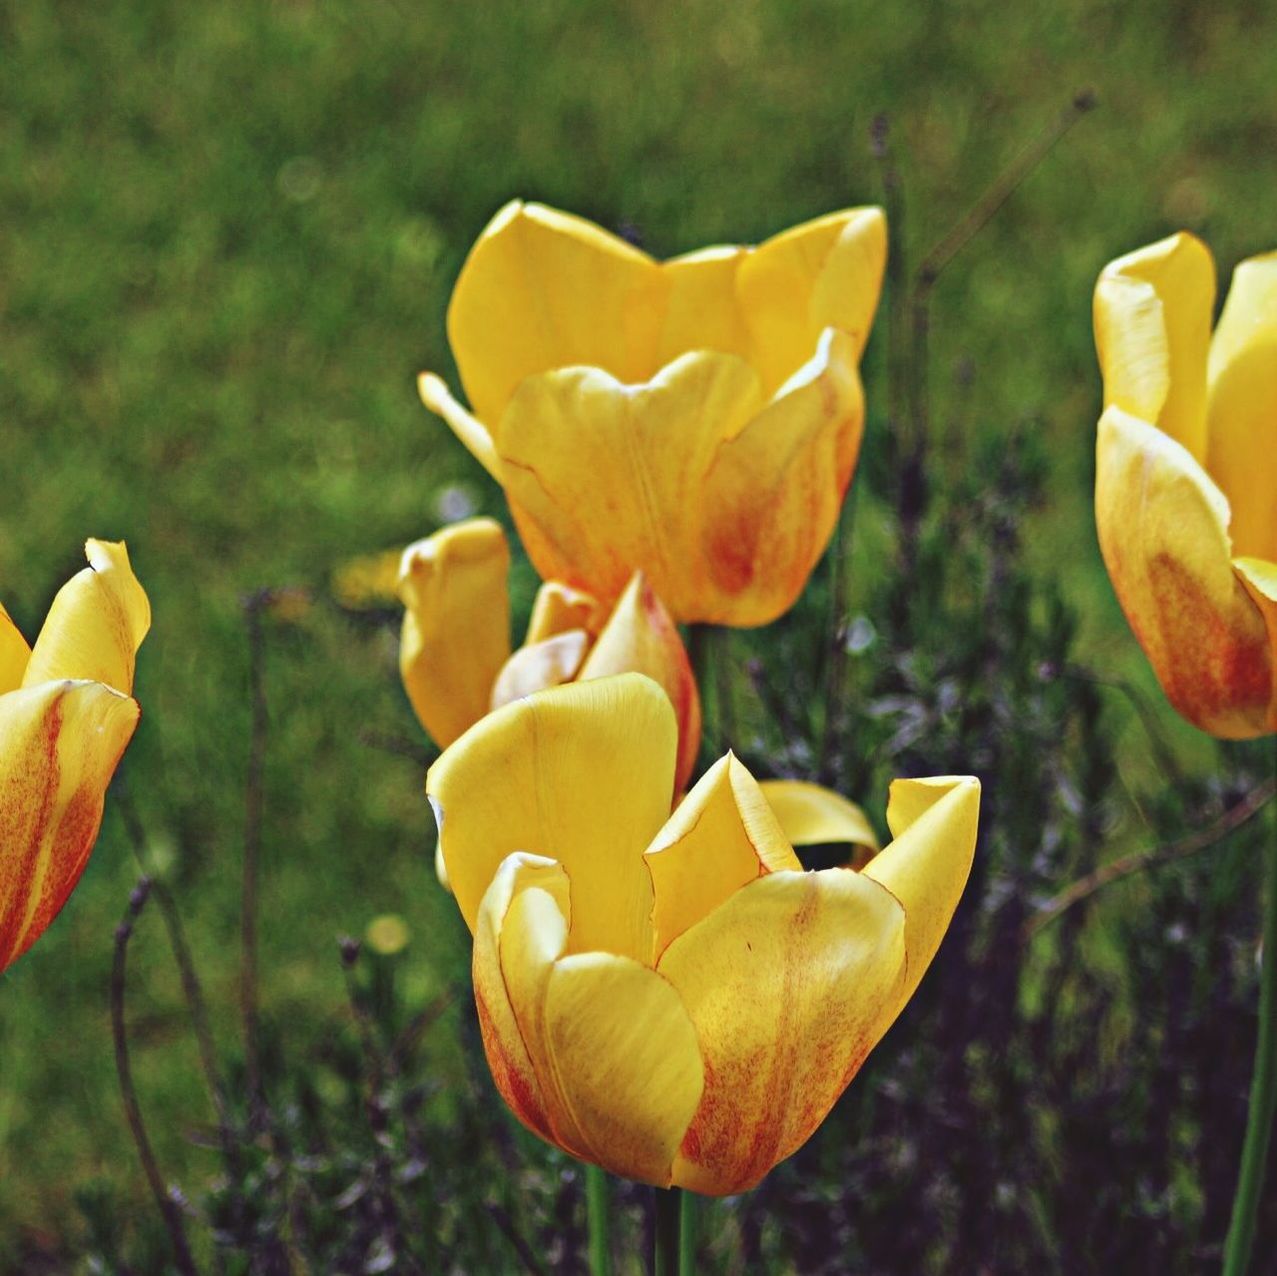 flower, petal, freshness, fragility, flower head, growth, yellow, close-up, focus on foreground, beauty in nature, blooming, nature, orange color, plant, tulip, bud, no people, field, park - man made space, in bloom